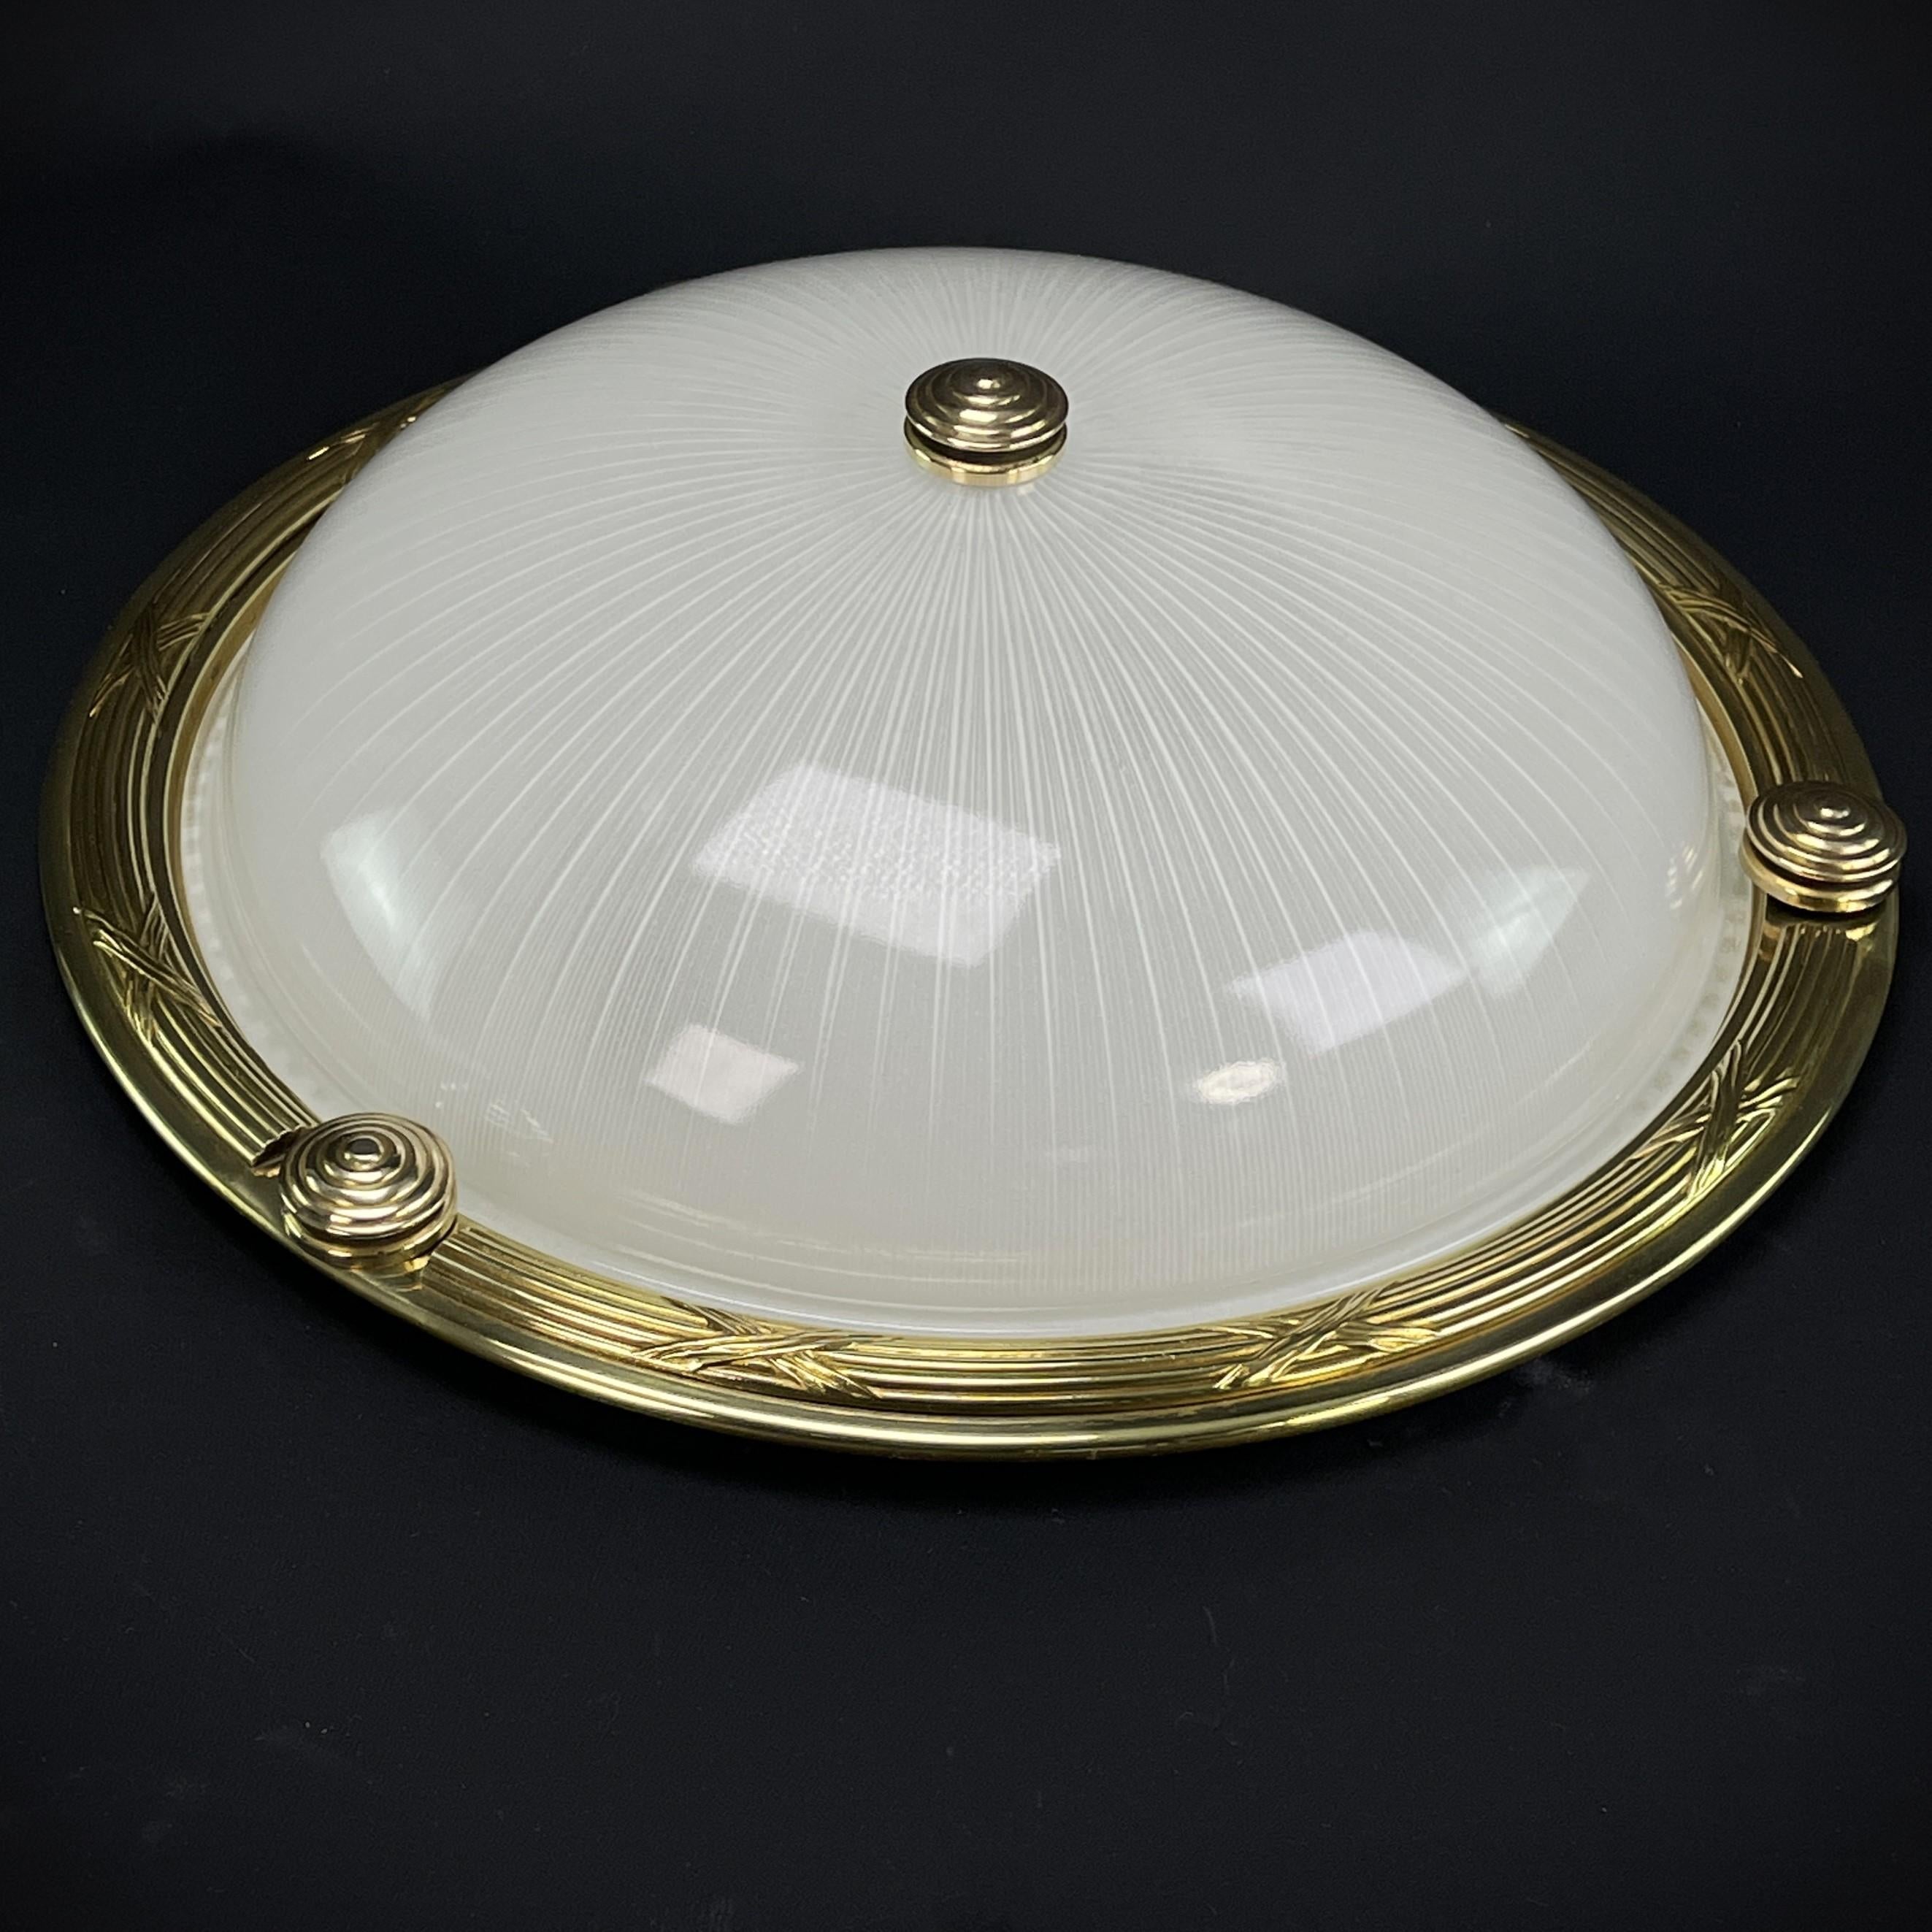 Art Deco Plafoniere by Holophane - 1930s

The ART DECO ceiling lamp is a remarkable example of the craftsmanship and style of the early 20th century. 

The signature 